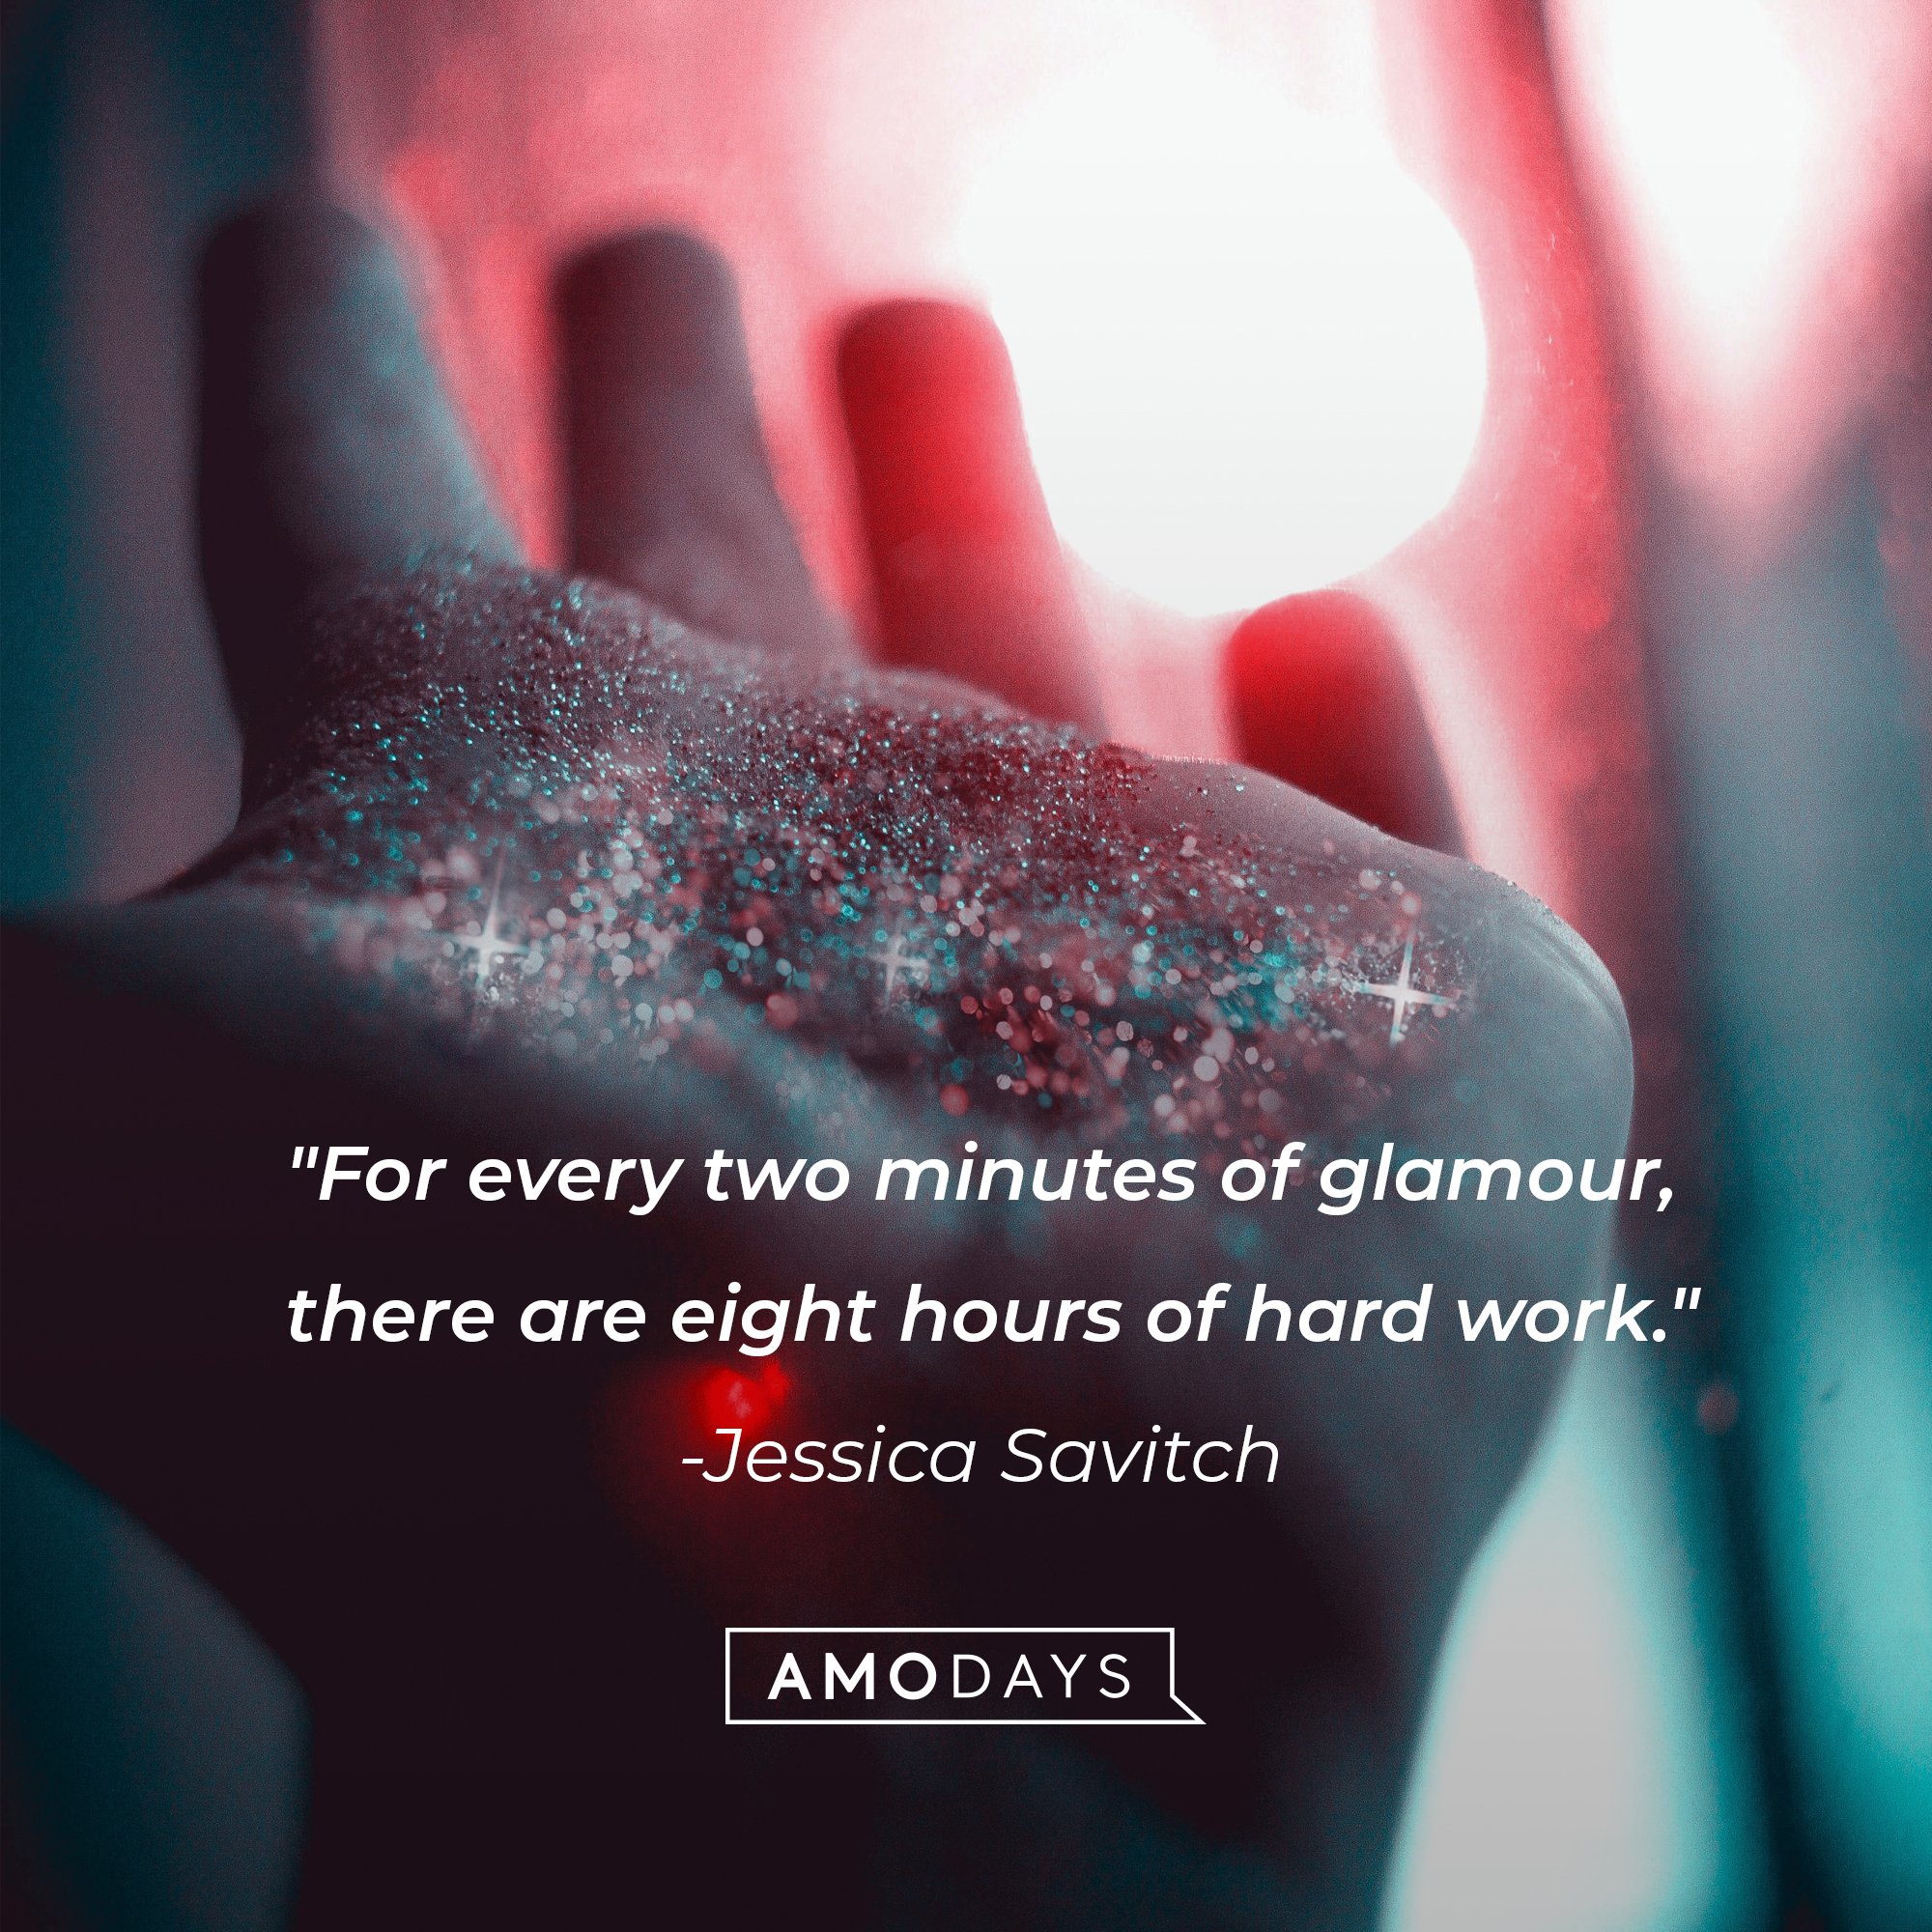 Jessica Savitch’s quote: "For every two minutes of glamour, there are eight hours of hard work." | Image: AmoDays